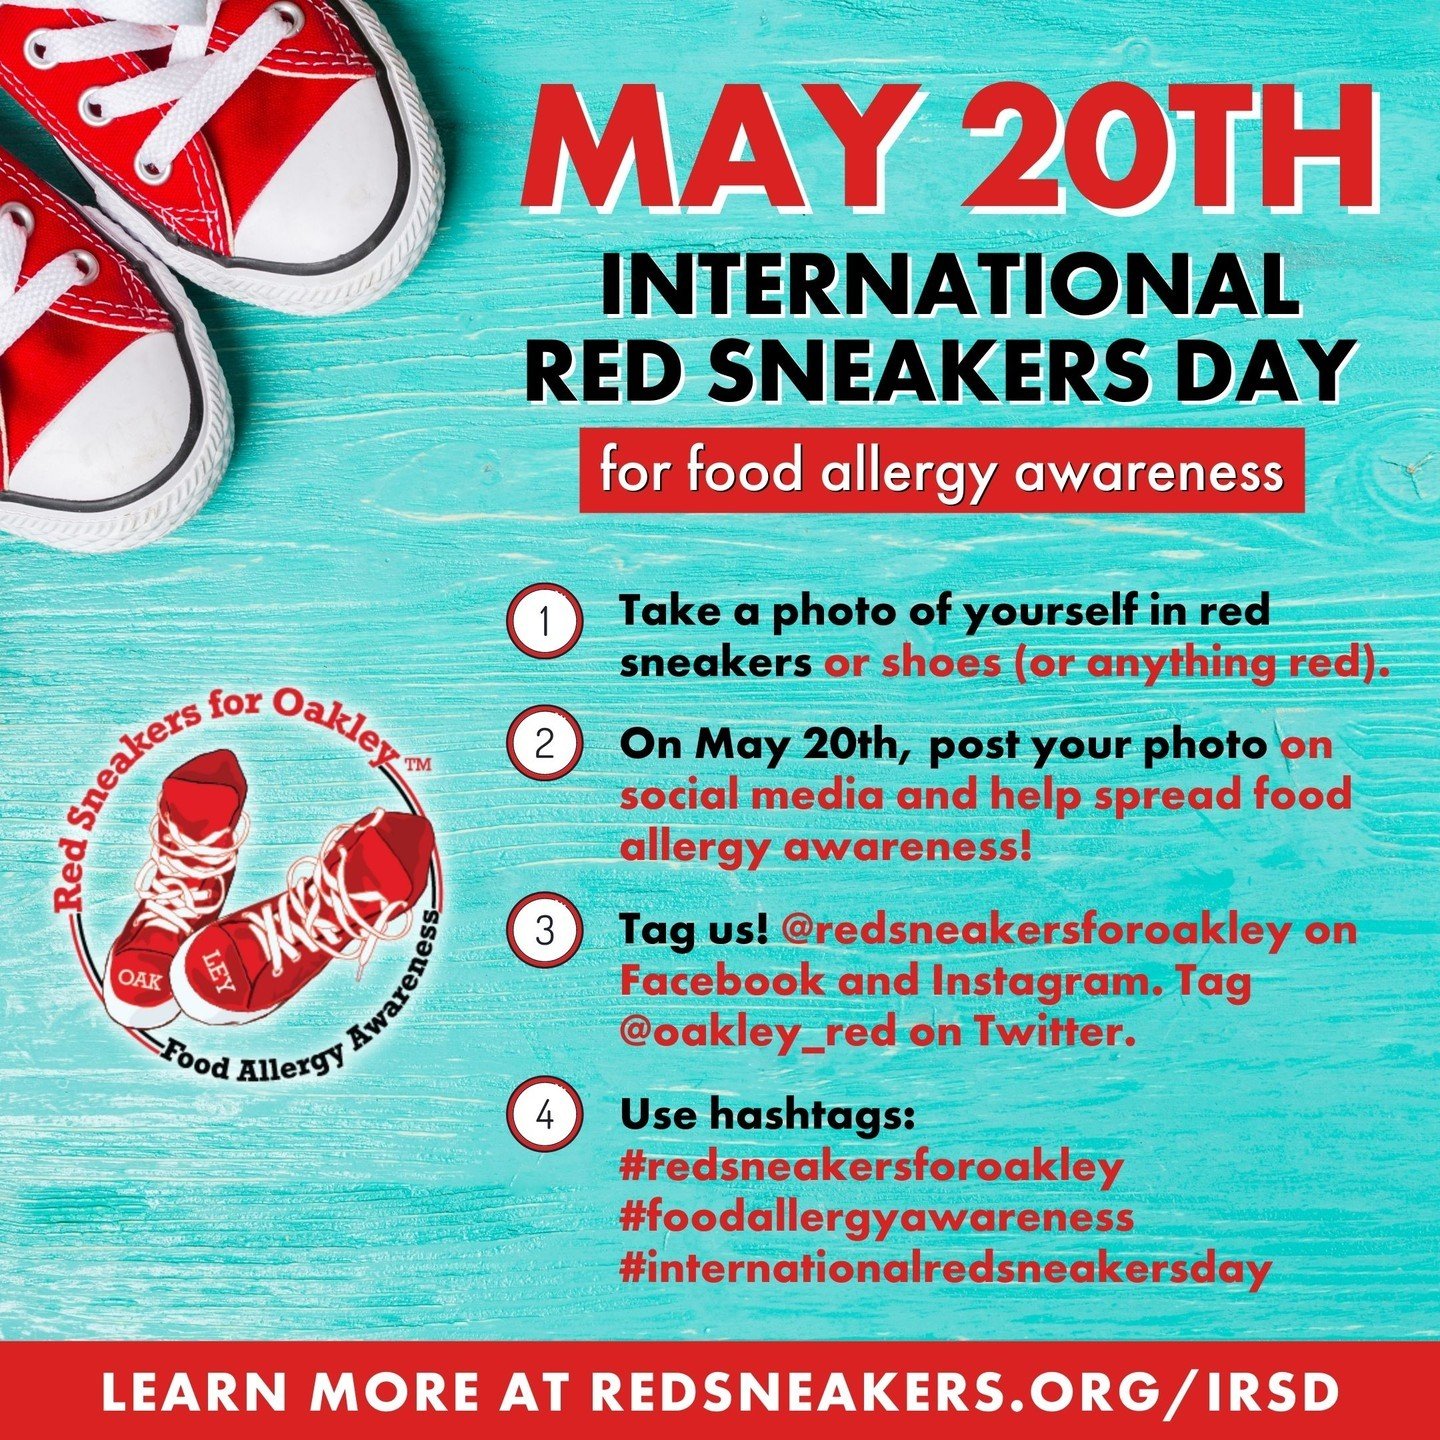 Get your red sneakers ready! International Red Sneakers Day is May 20th! It's a special day to spread food allergy awareness.

HOW CAN YOU GET INVOLVED?

It's so easy! Take a photo of yourself in red sneakers or shoes (or anything red). On May 20th, 